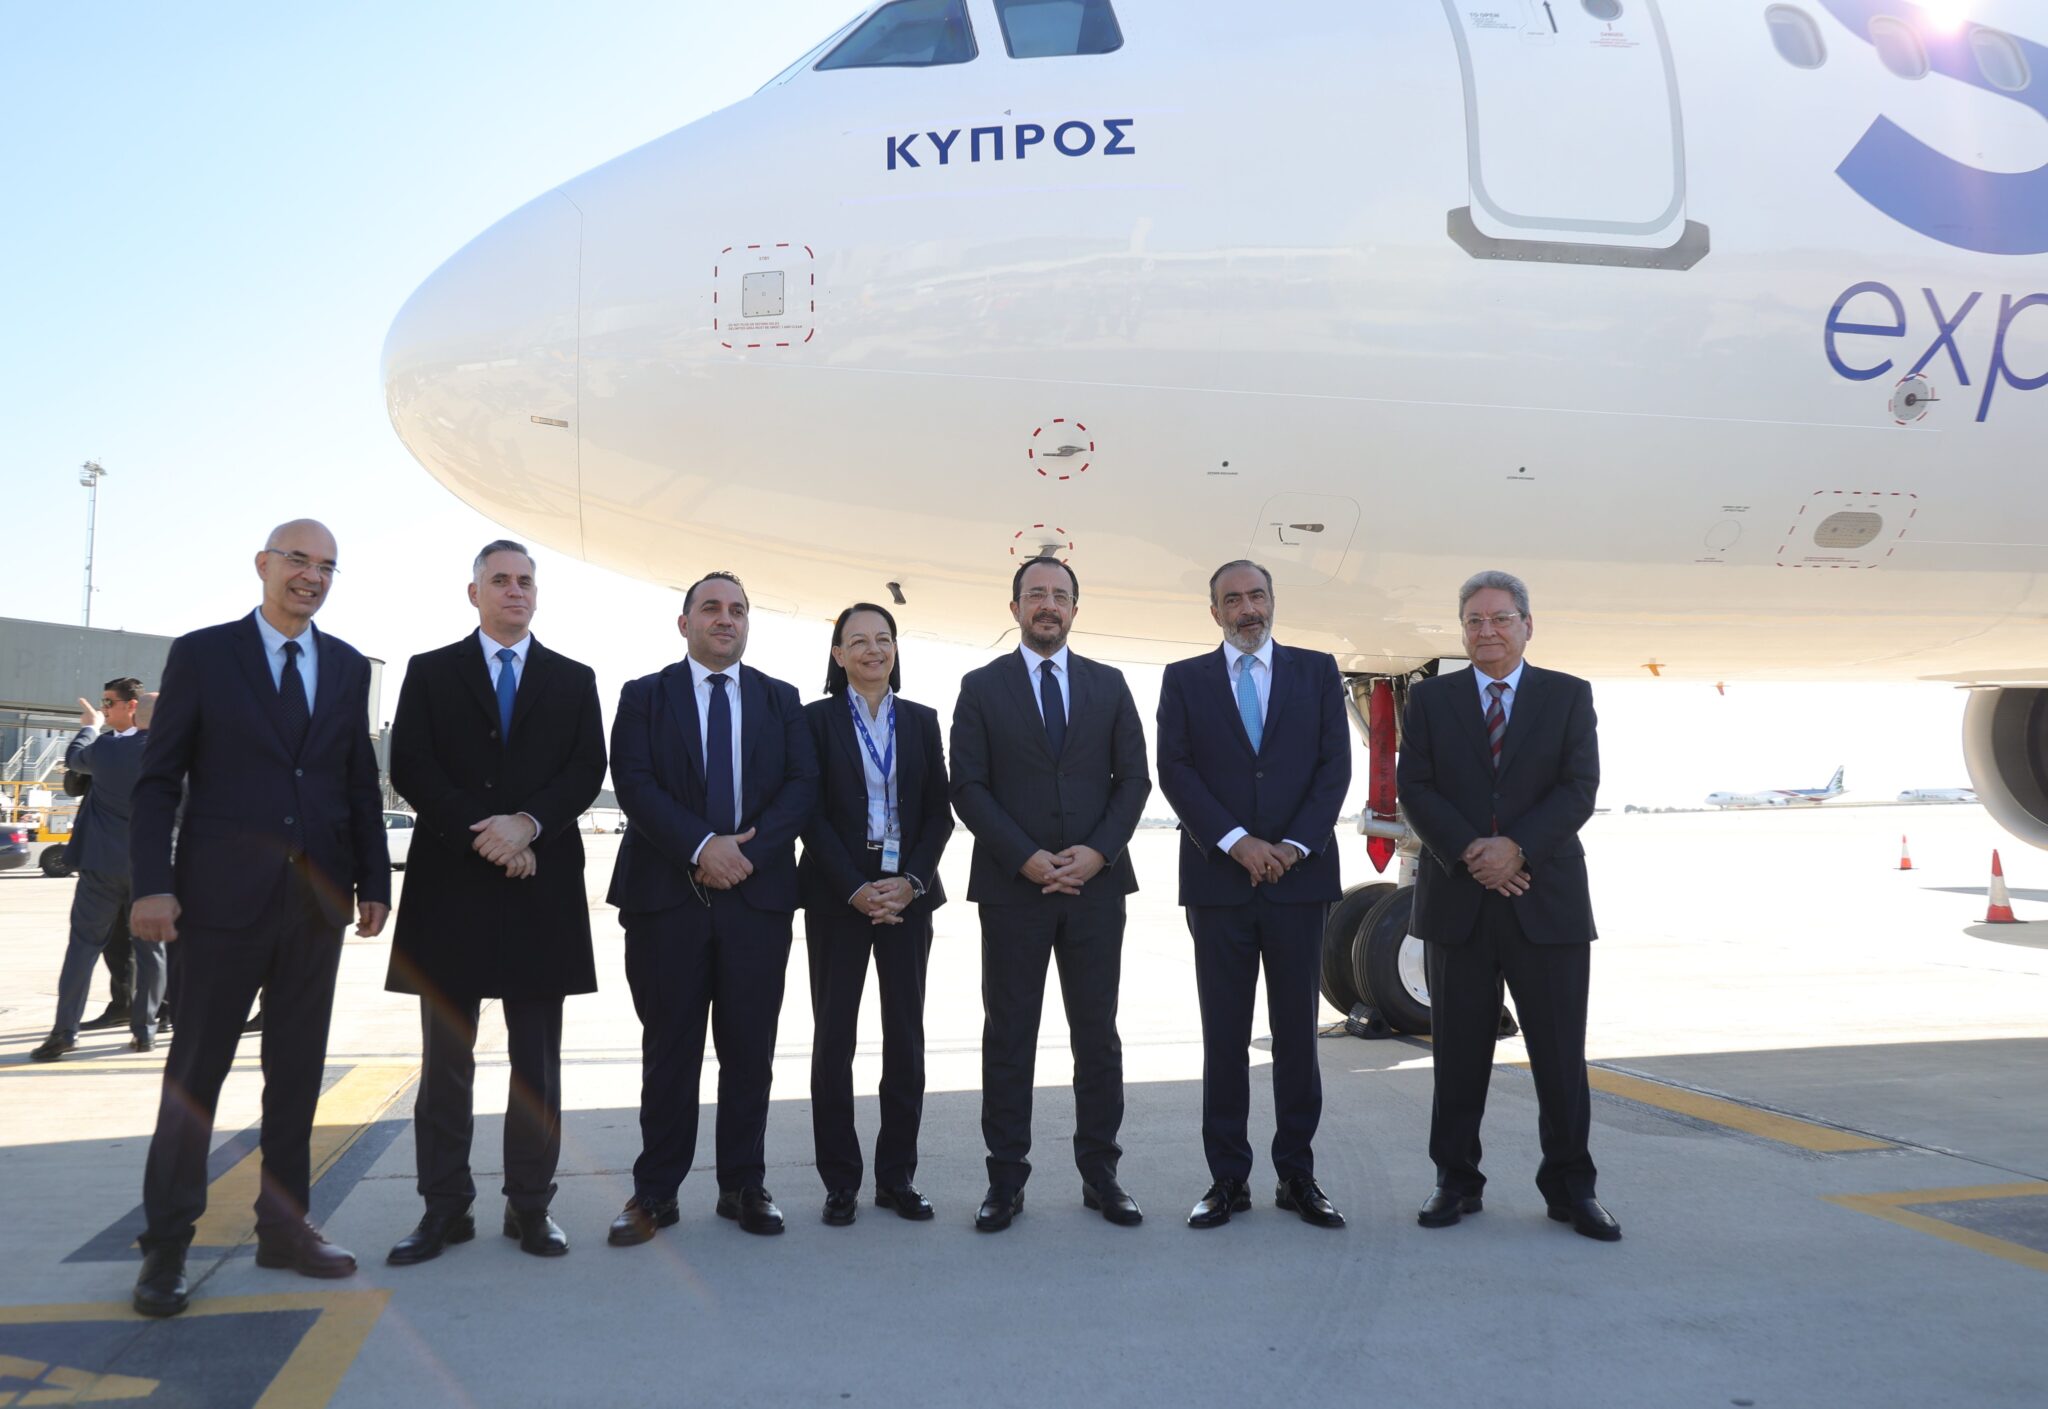 SKY express: The first AIRBUS A321neo was officially named by President of the Republic of Cyprus